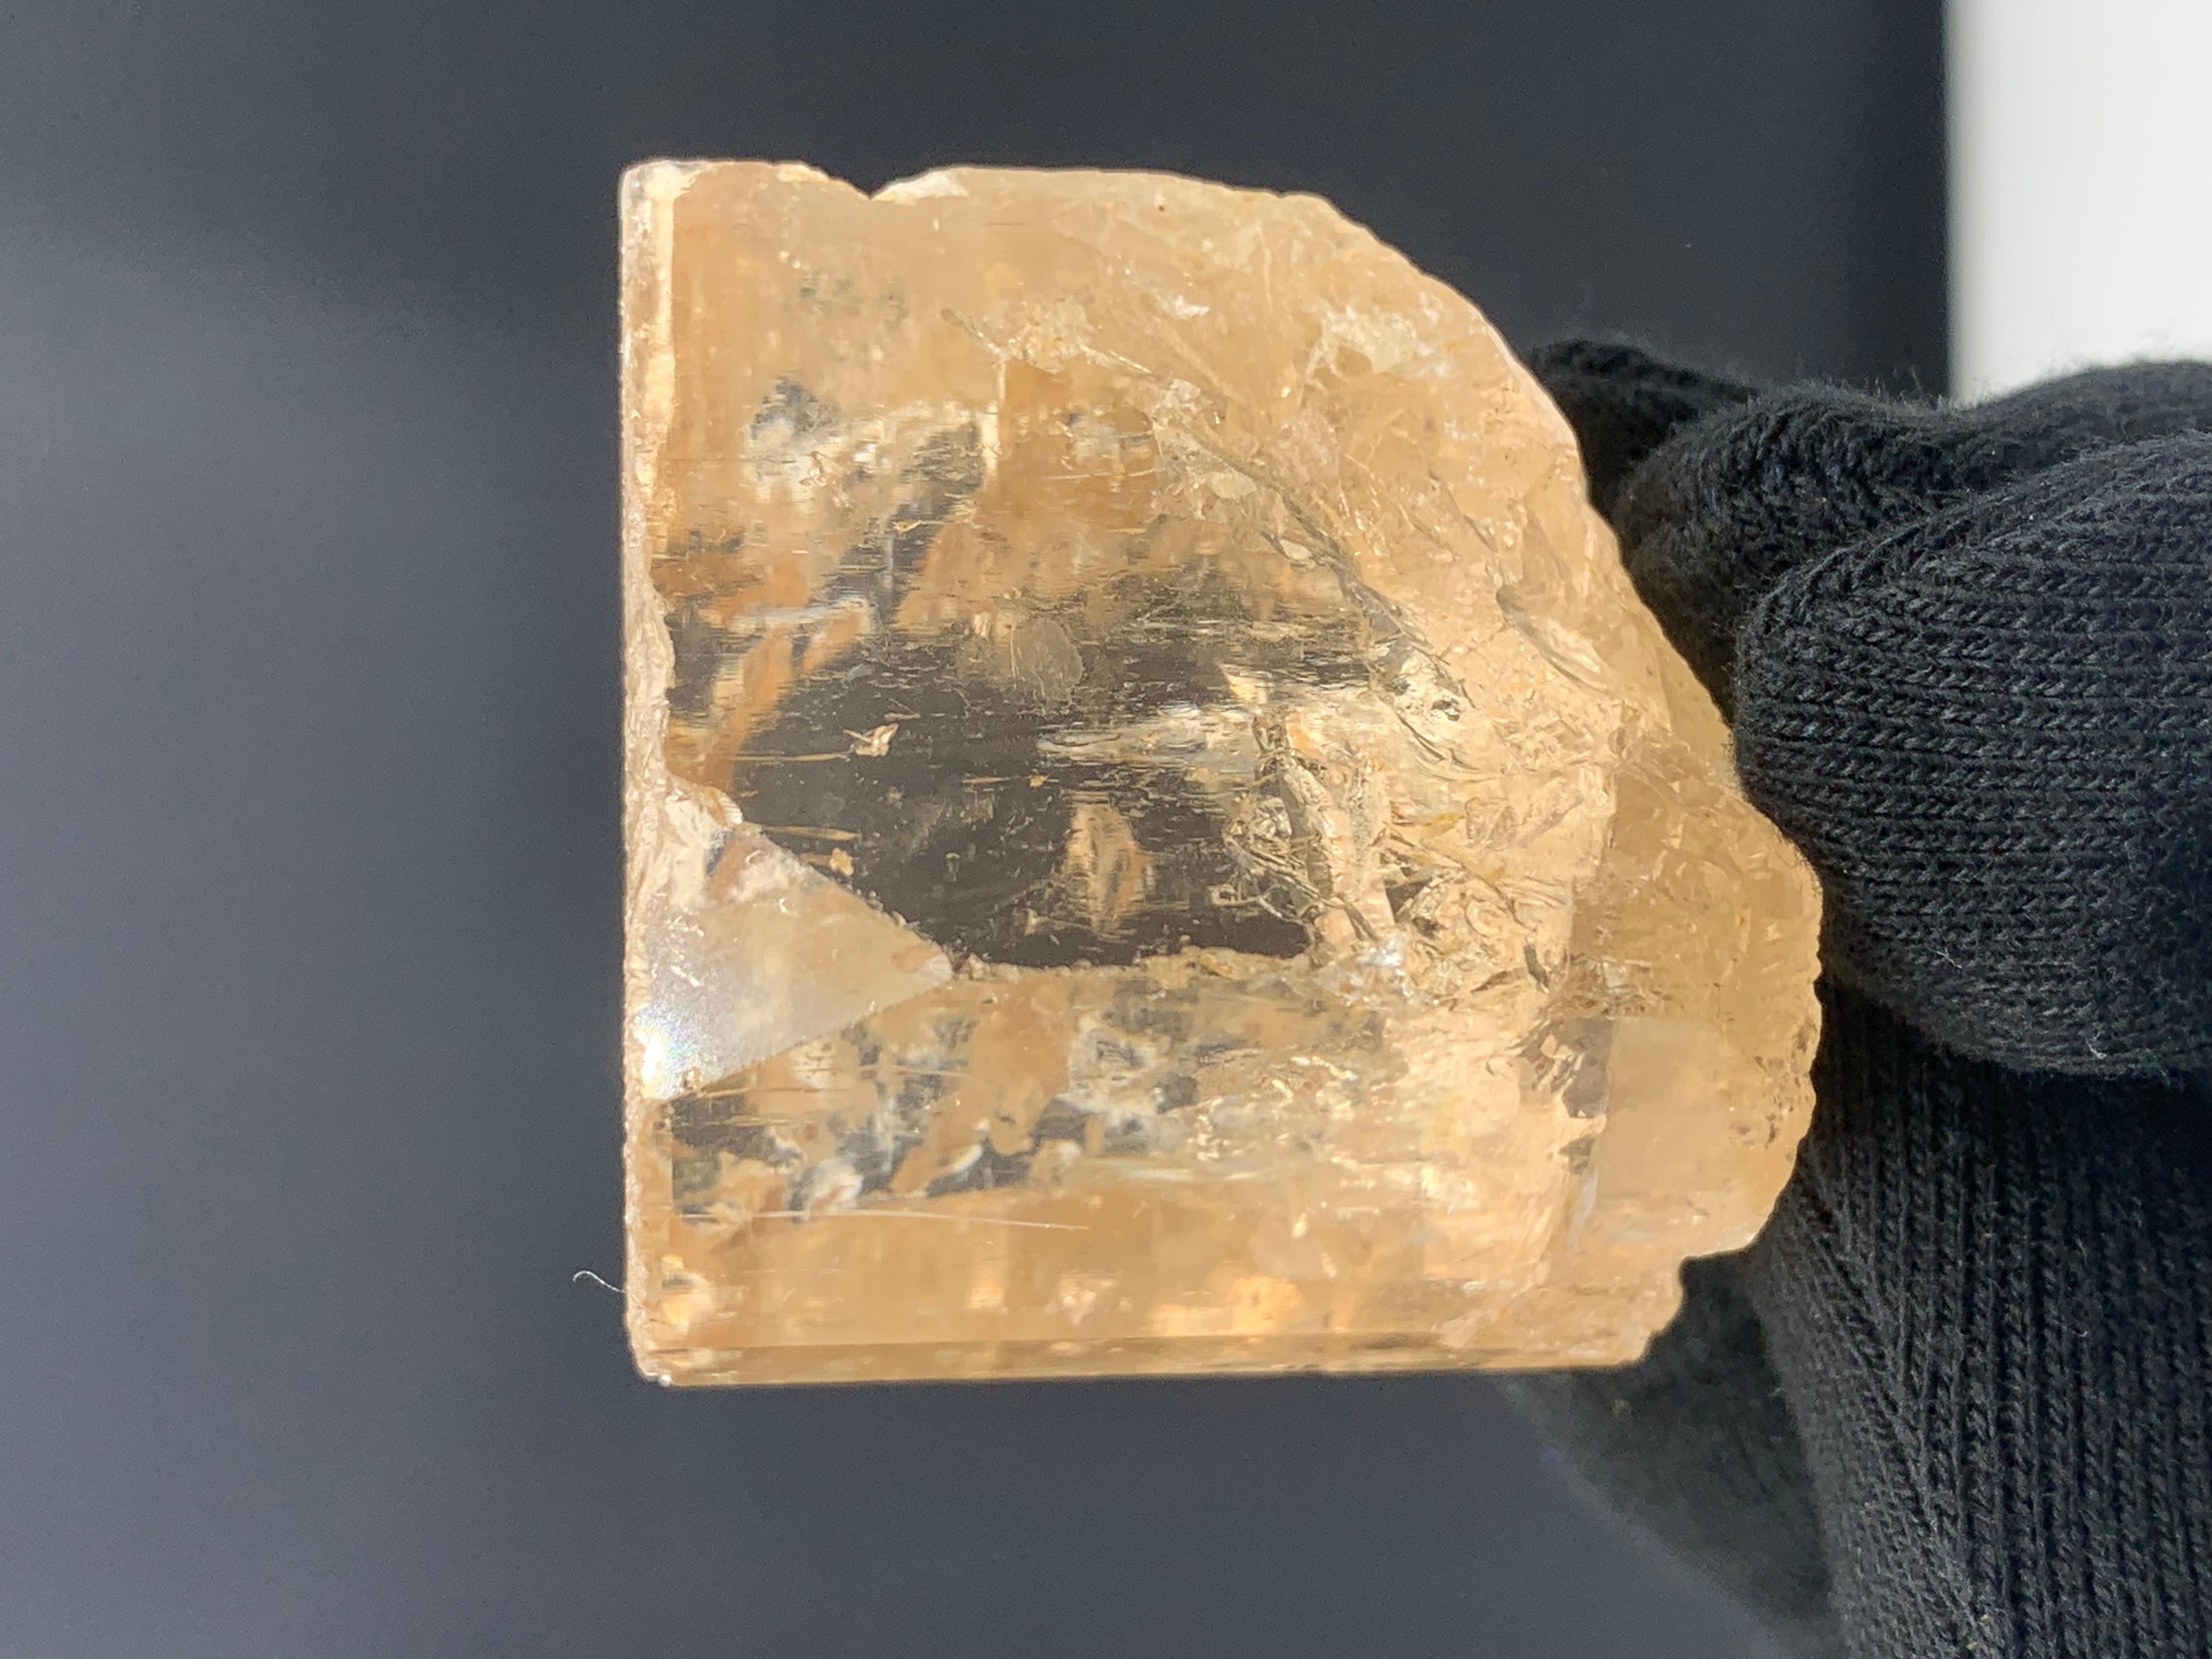 Lustrous Topaz Crystal From Skardu, Pakistan 
Weight: 148.06 Gram 
Dim: 4.1 x 3.7 x 3.3 
Color : Golden
Origin : Skardu, Pakistan 

Topaz is a silicate mineral of aluminium and fluorine with the chemical formula Al₂SiO₄(F, OH)₂. It is used as a